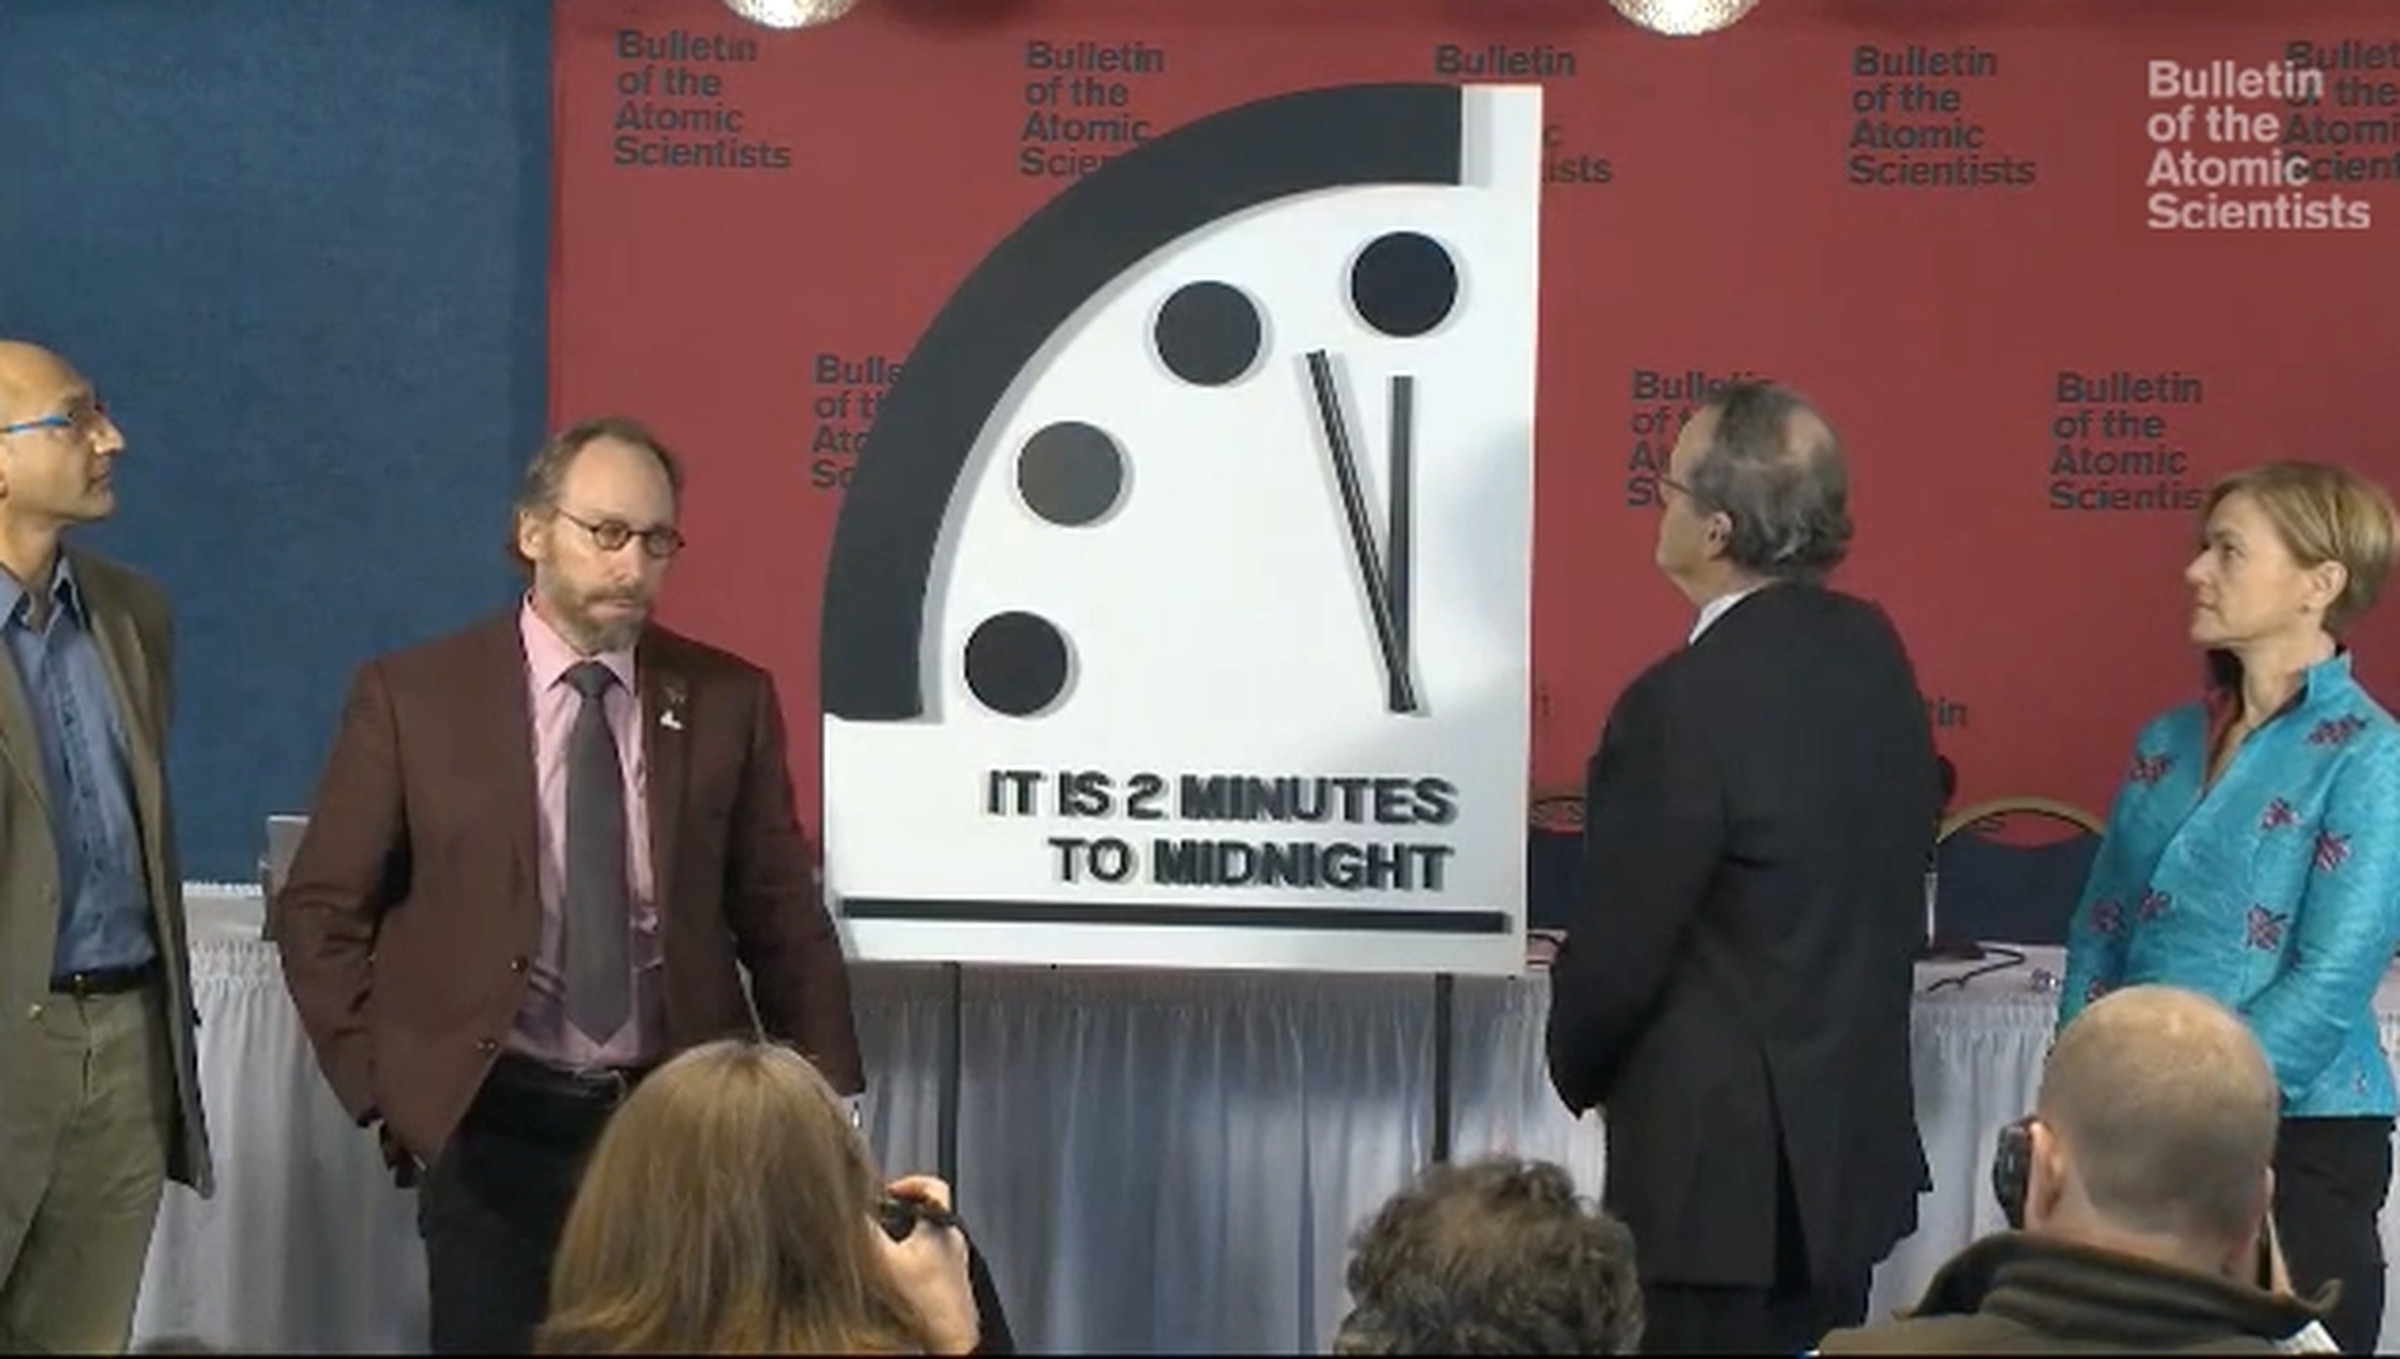 Physicists Lawrence Krauss and Robert Rosner of the Bulletin of the Atomic Scientists move the Doomsday Clock to 2 minutes to midnight.  